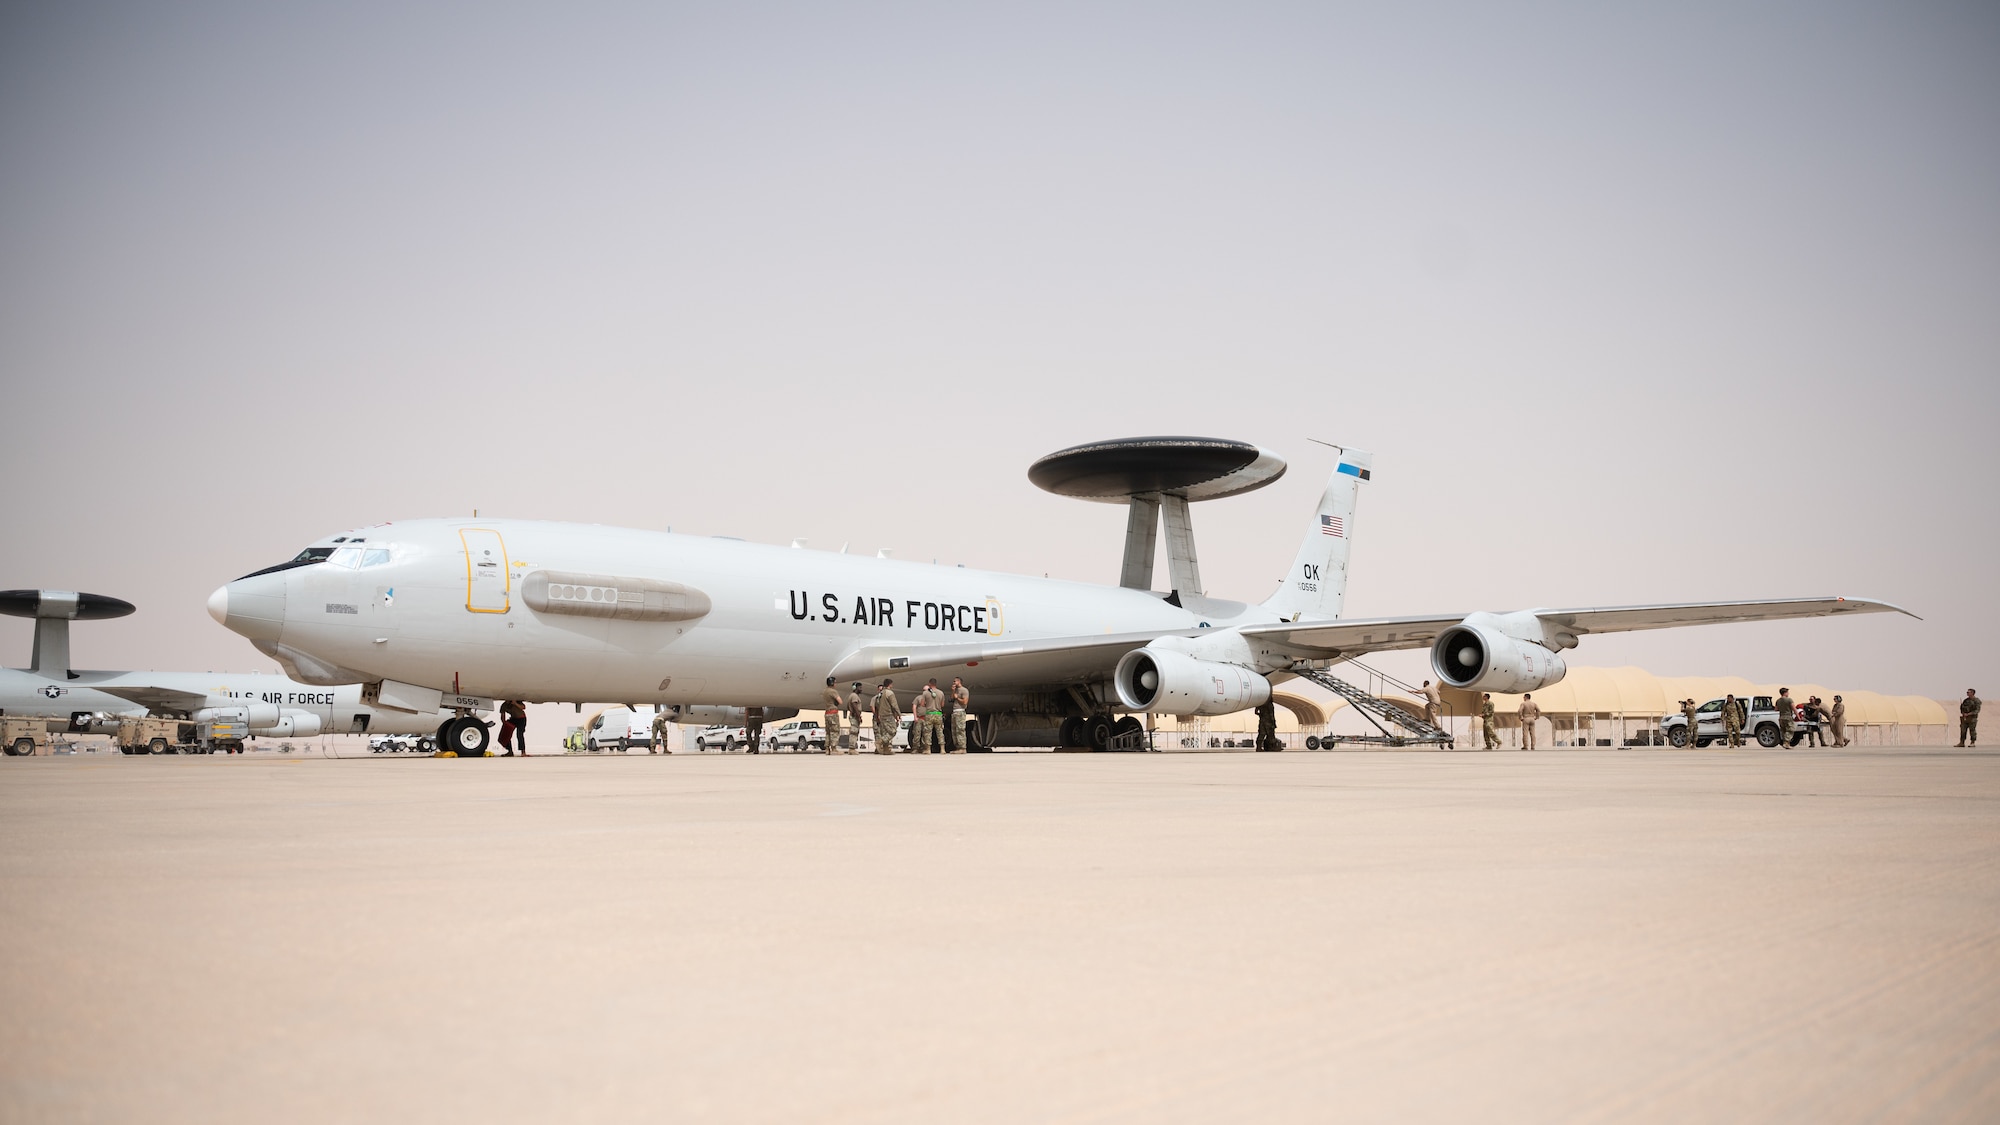 A U.S. Air Force E-3 Sentry assigned to the 968th Expeditionary Airborne Air Control Squadron sits on the flight line at Prince Sultan Air Base, Kingdom of Saudi Arabia, March 6, 2022. The E-3 is an airborne warning and control system, aircraft with an integrated command and control battle management, surveillance, target detection, and tracking platform. (U.S. Air Force photo by Senior Airman Jacob B. Wrightsman)